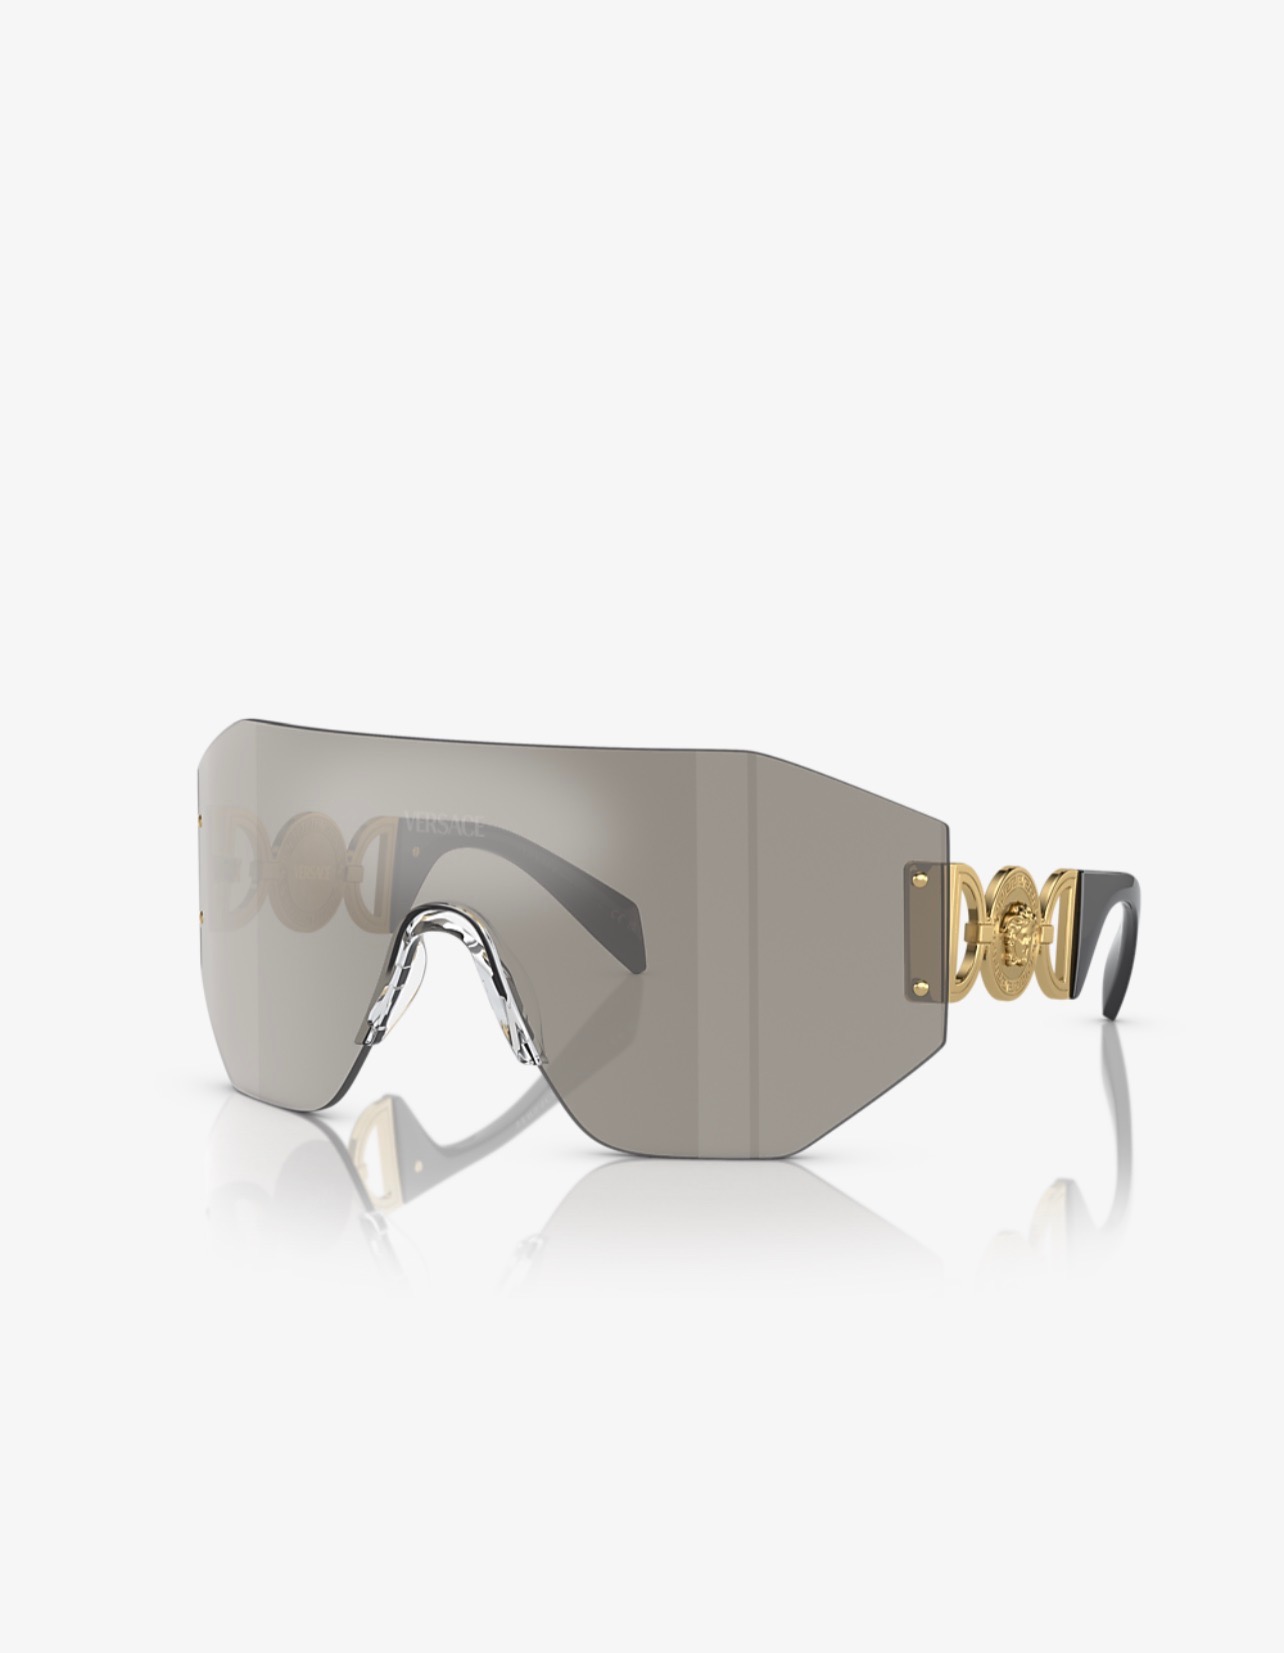 Bomb Accessories of the Day: These $372 Unisex Versace Sunglasses Deserve A Spot in Your Accessory Collection